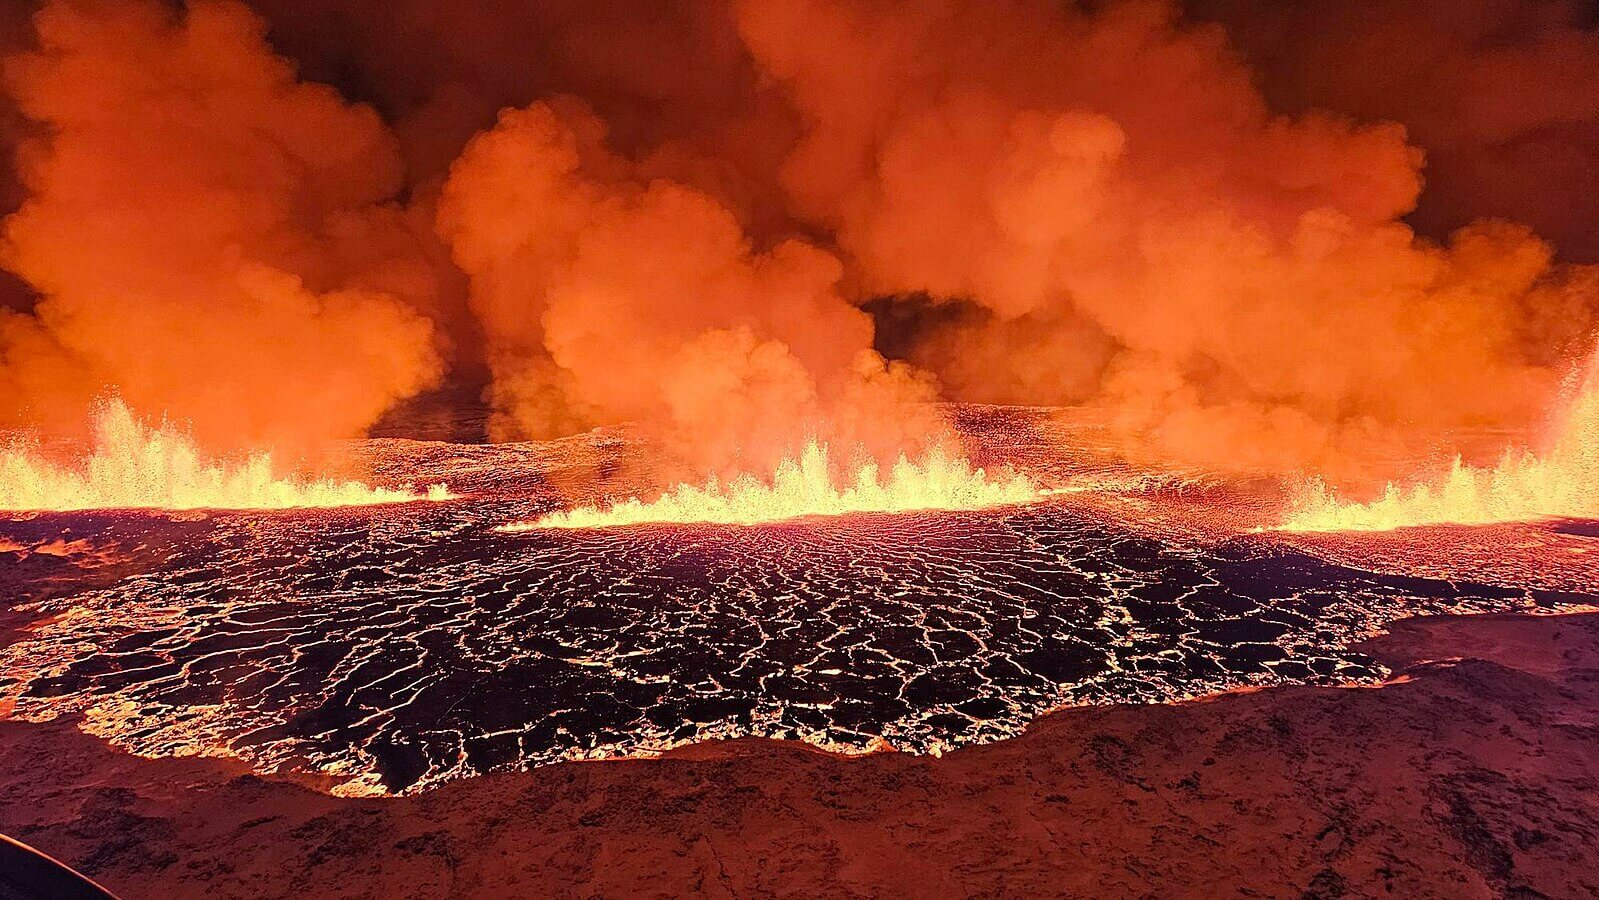 It Looks Like “The Gates of Hell” Have Opened In Iceland As Our Planet Continues To Tremble In Wild & Unpredictable Ways